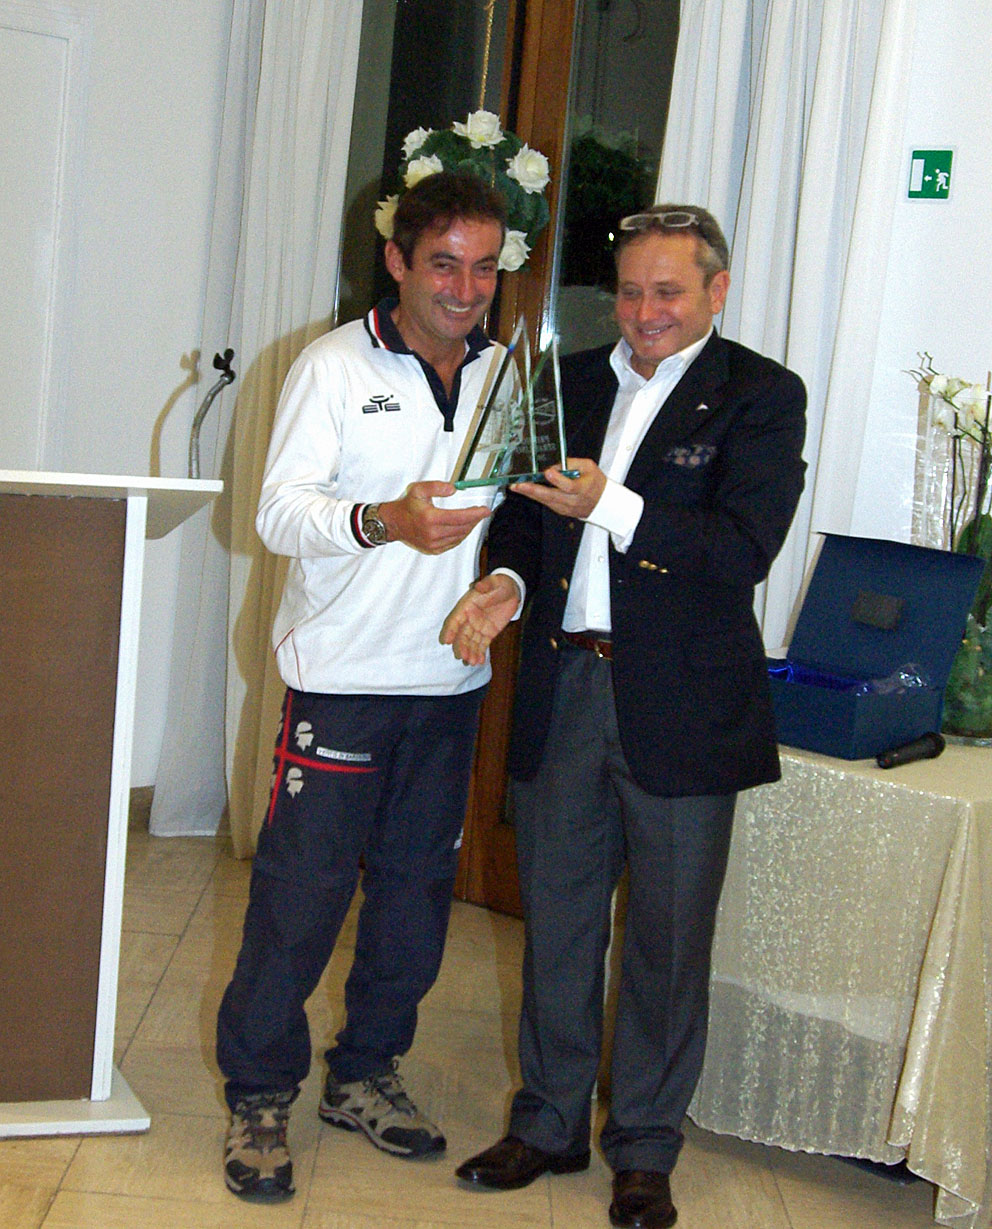 Presentation of the prize "Straulino" a lifetime of sailing- Yacht Club Montecatini Terme